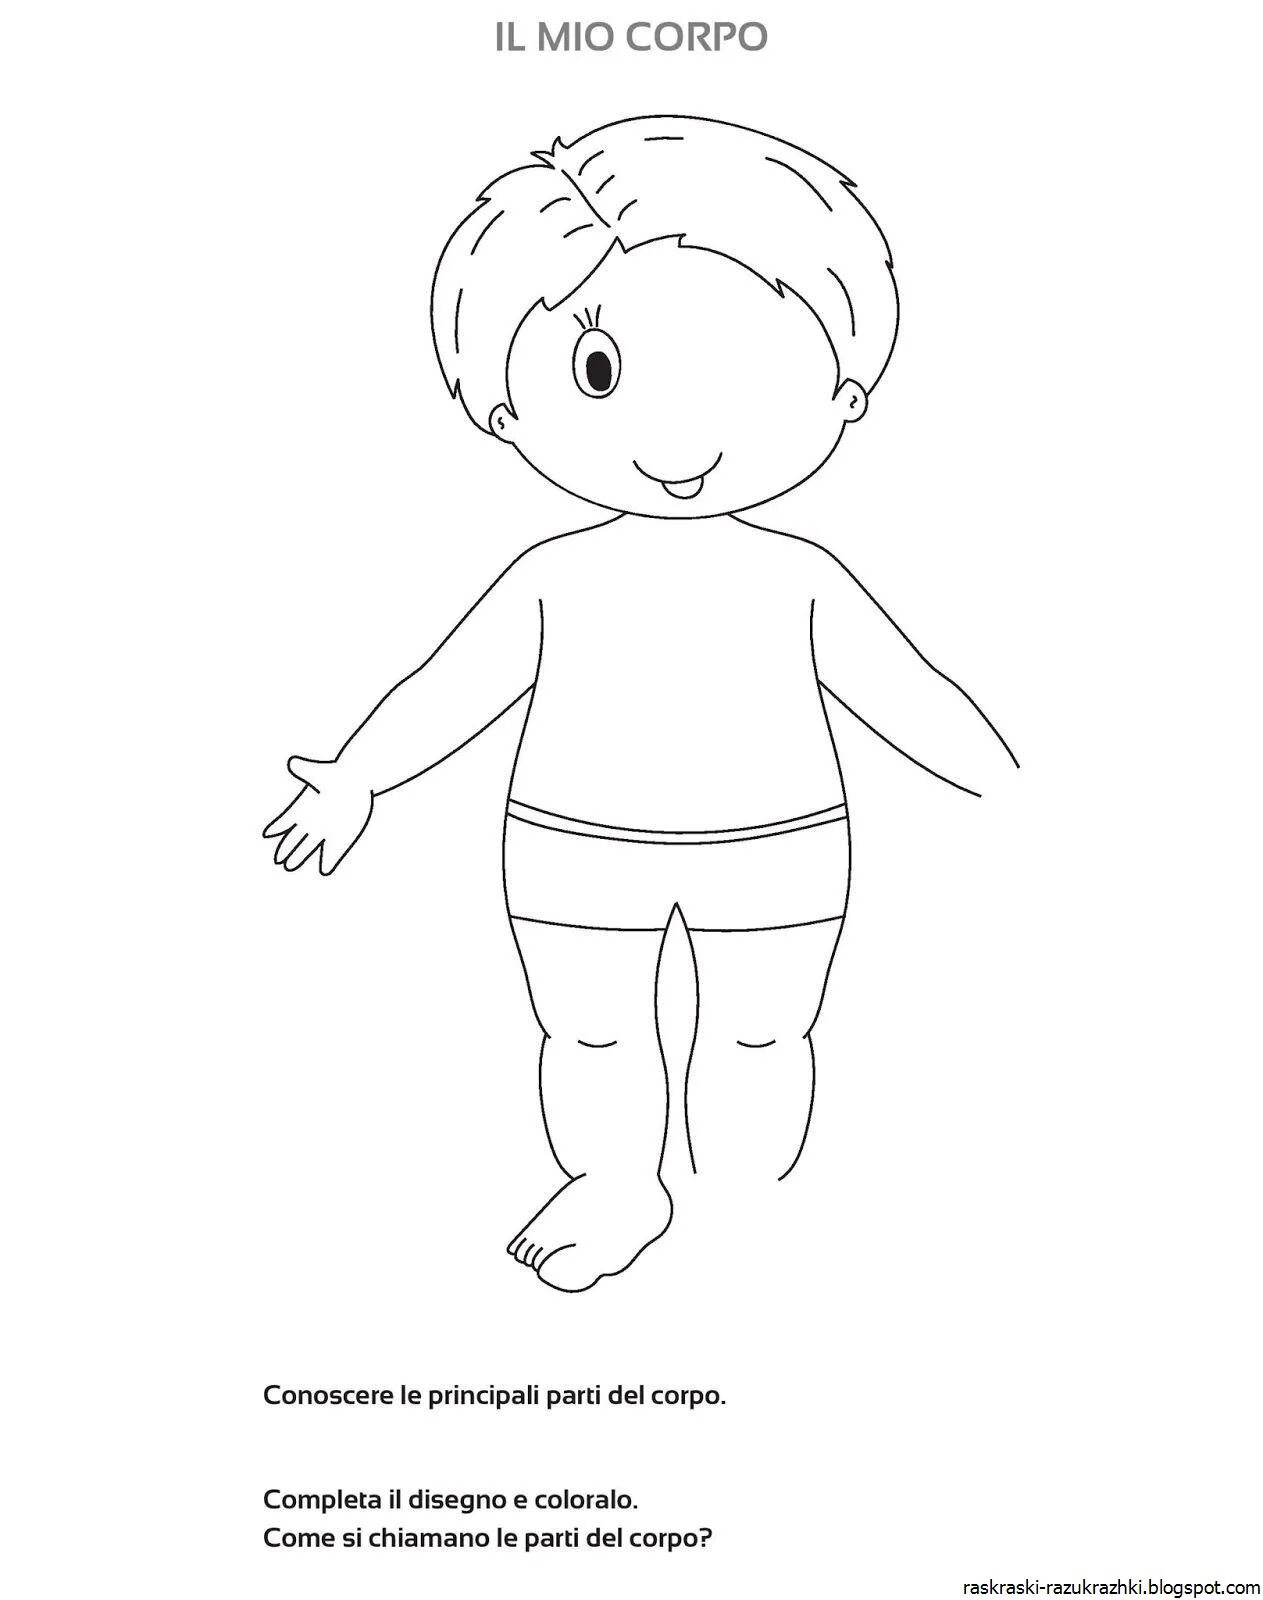 Fun human structure coloring book for preschoolers